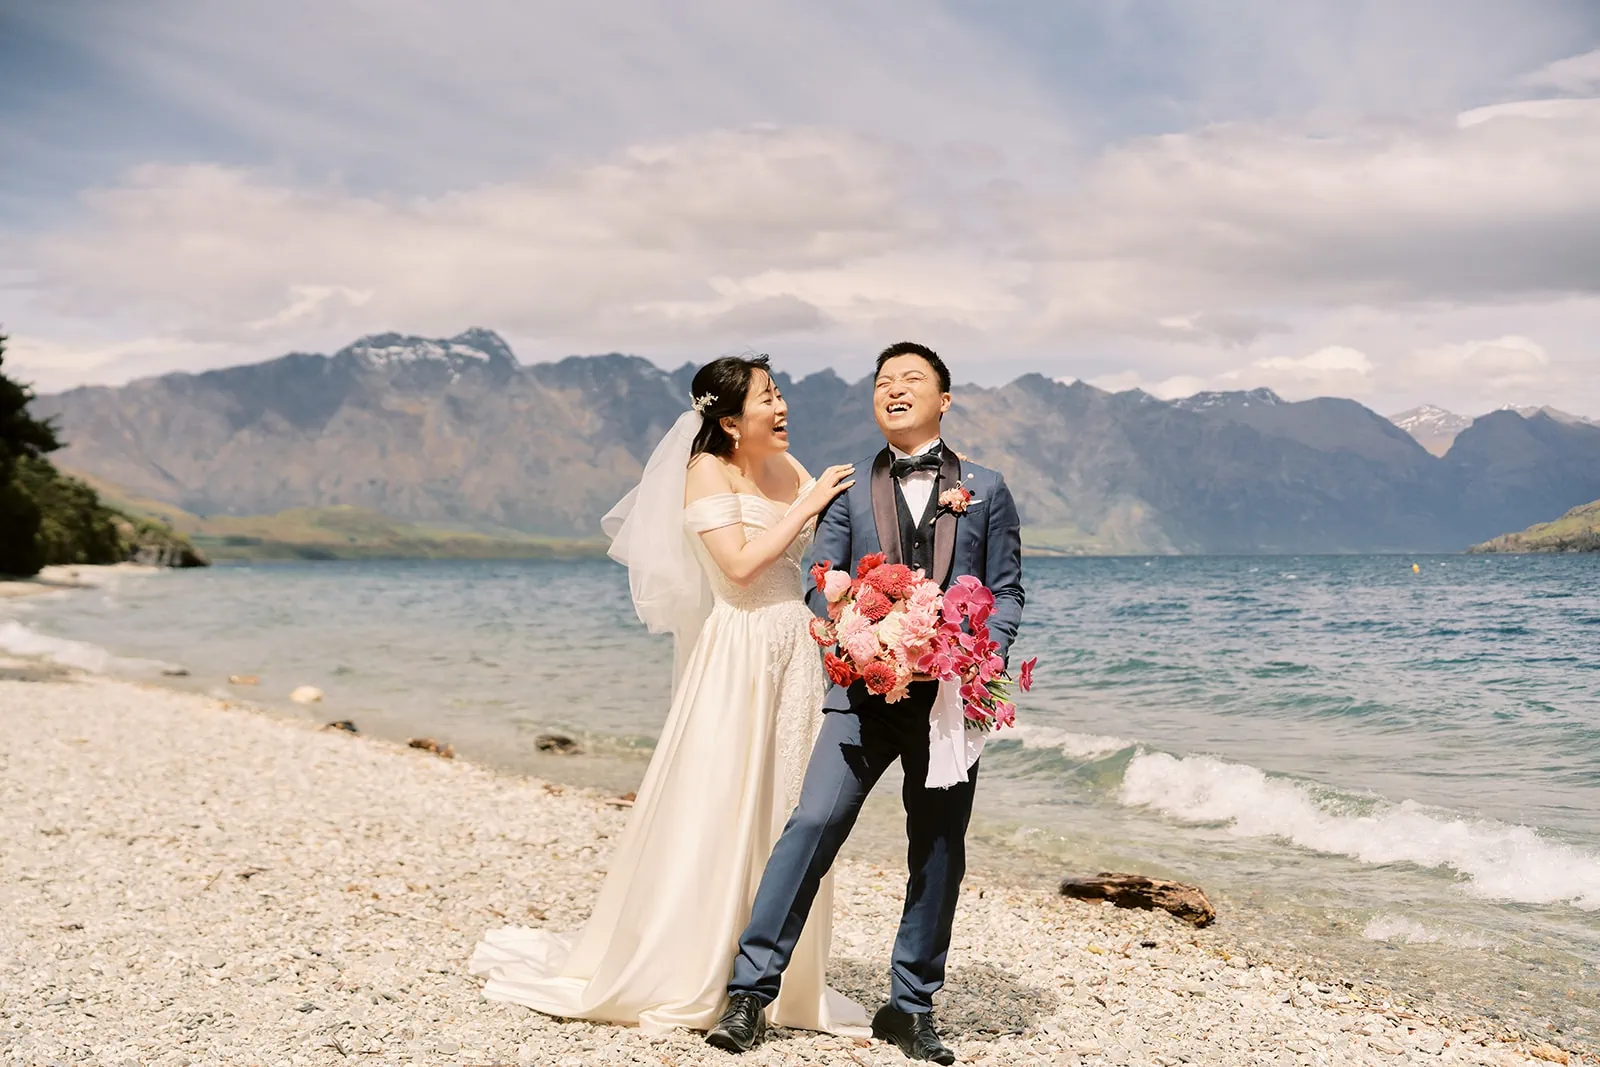 Queenstown Elopement Heli Wedding Photographer クイーンズタウン結婚式 | A pre-wedding photoshoot of a bride and groom on a beach with mountains in the background.